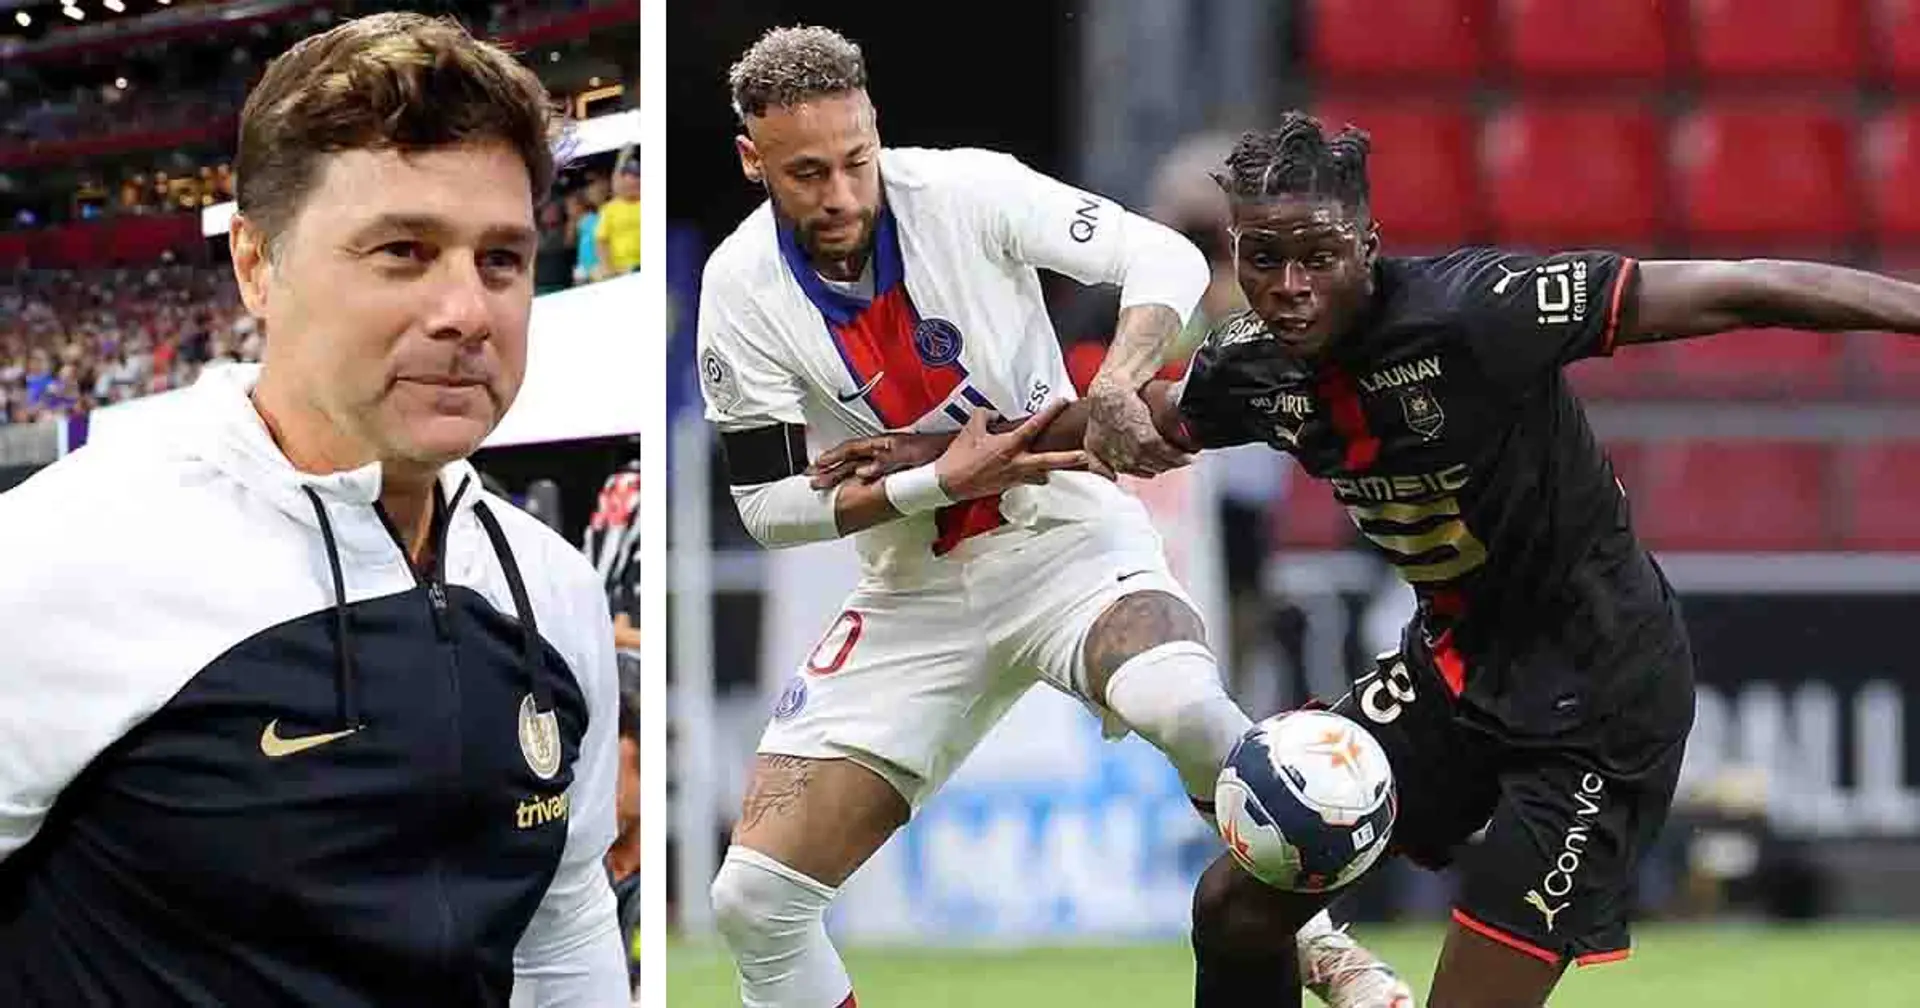 'We're signing a Ballon d'Or candidate': fans react as Chelsea agree £23.5m deal to sign Ligue 1 midfielder